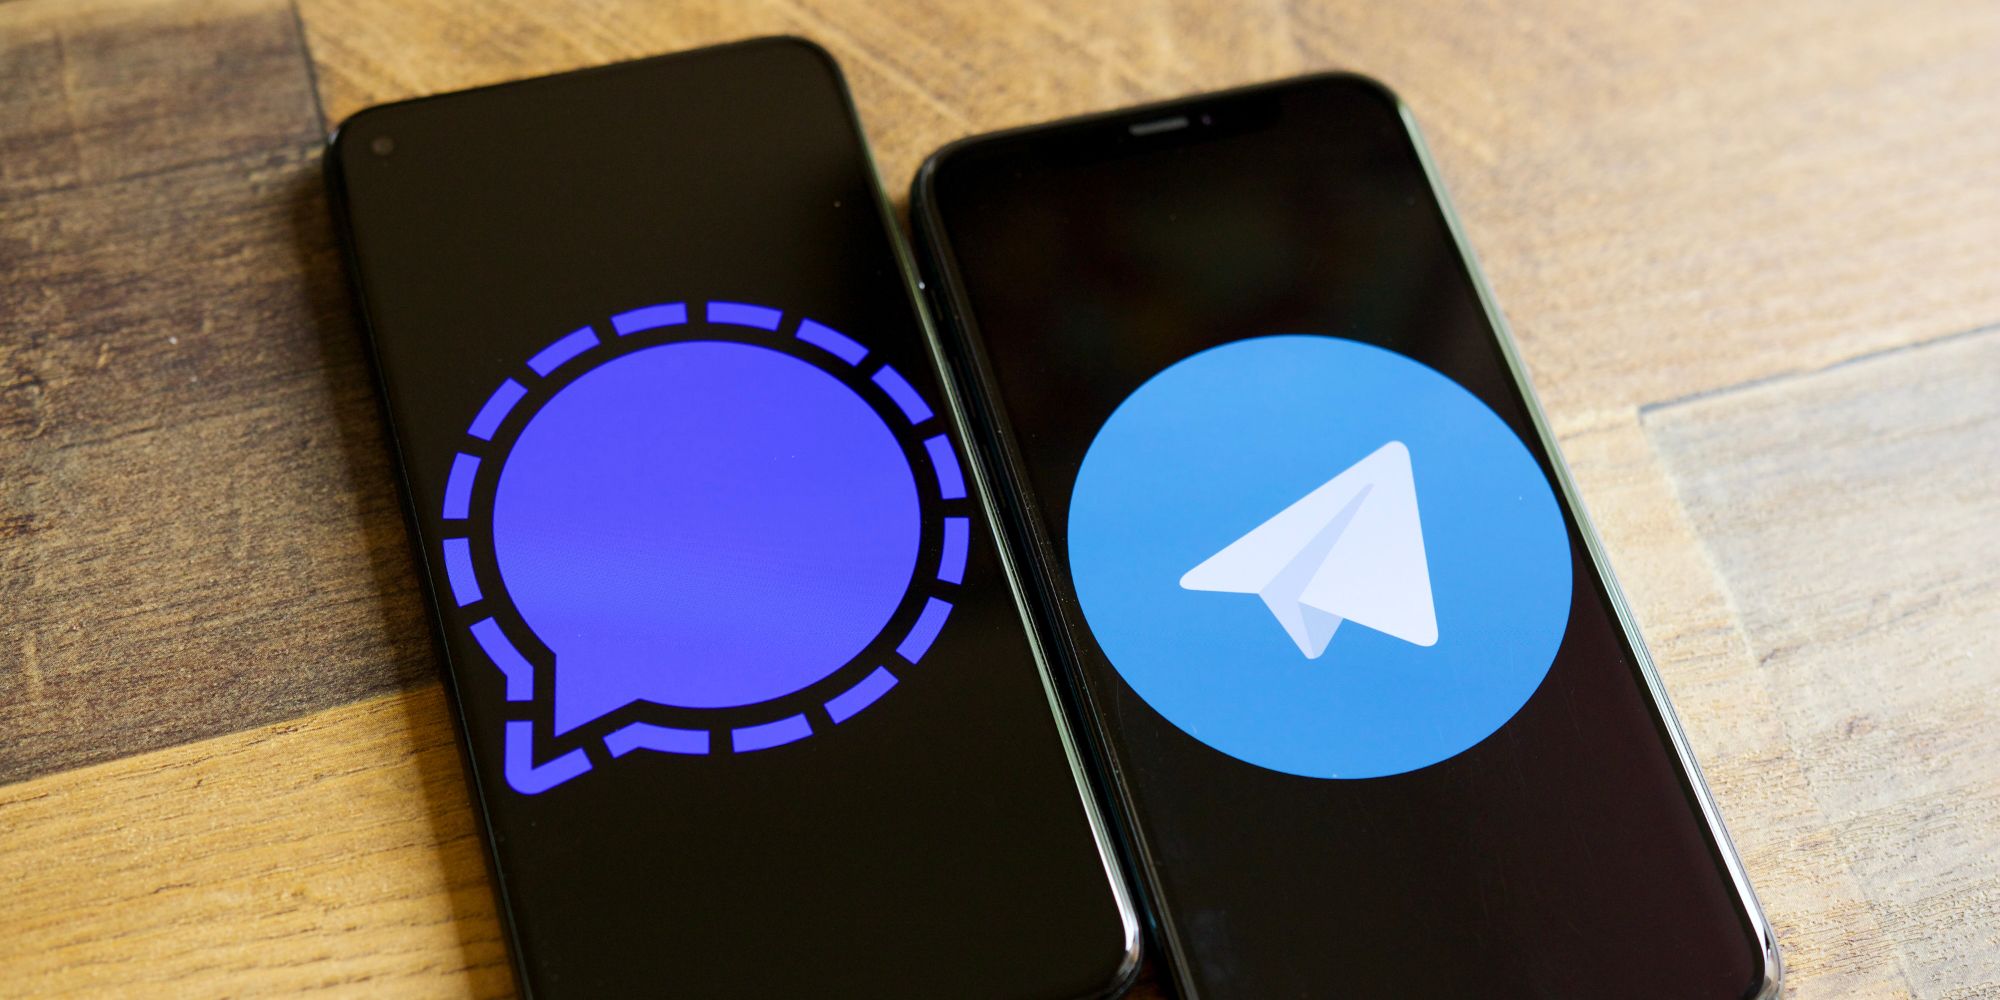 Signal and Telegram logos on two smartphones